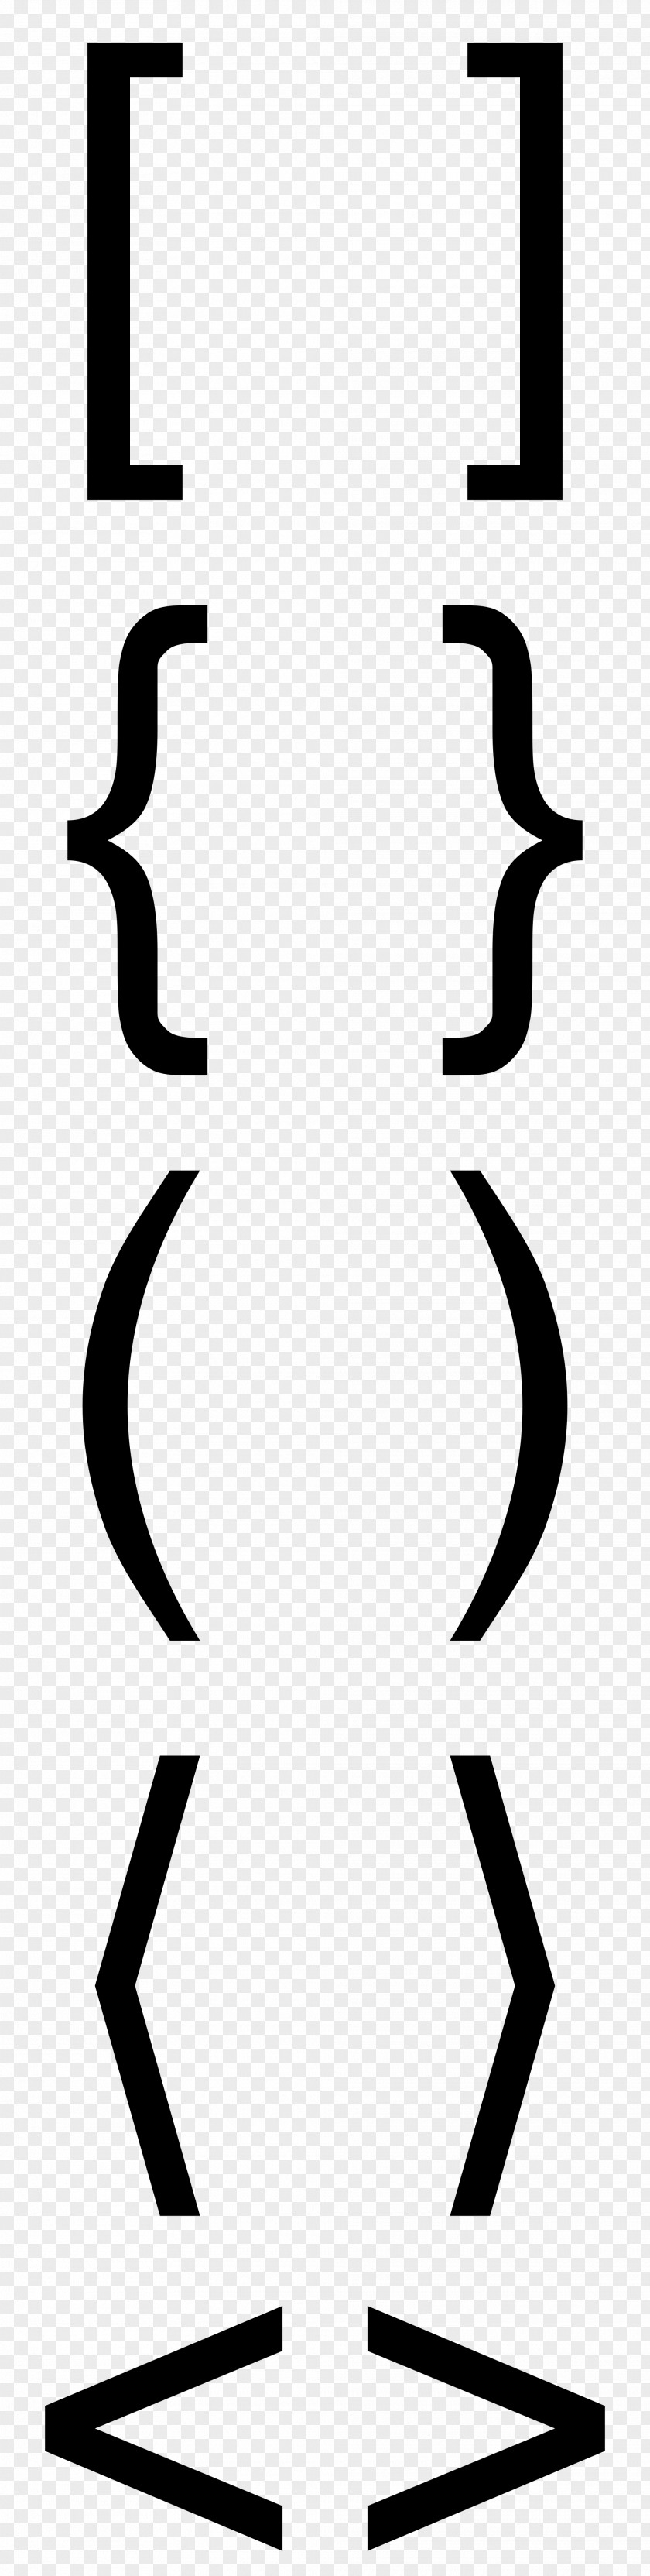 Bracket Punctuation Parenthesis Wikipedia Ampersand PNG